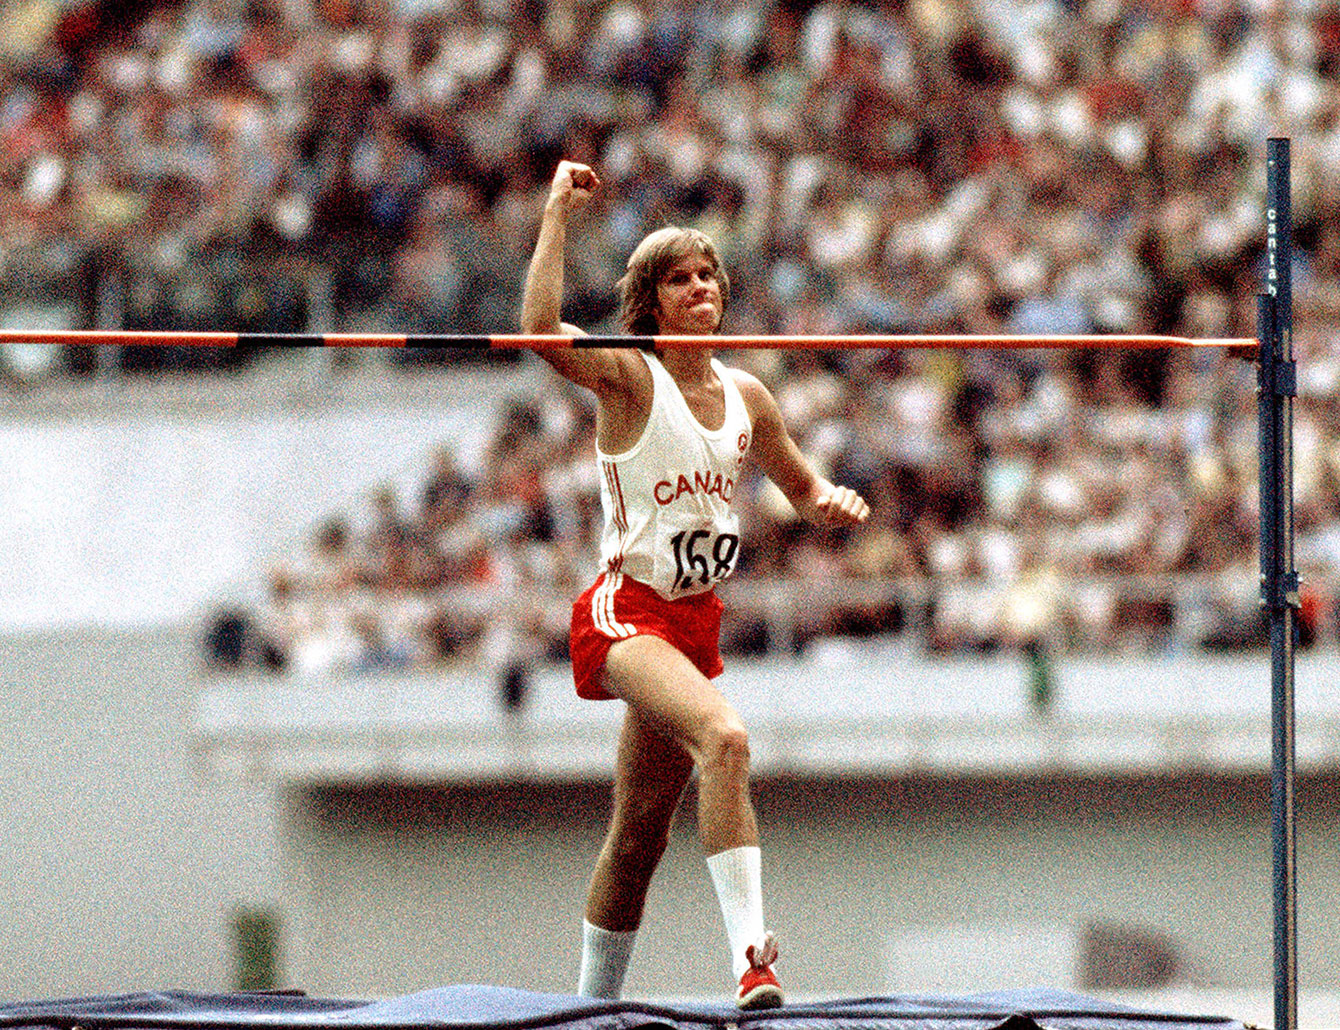 Greg Joy celebrates a clean jump at the Olympic Games in Montreal on July 31, 1976. 